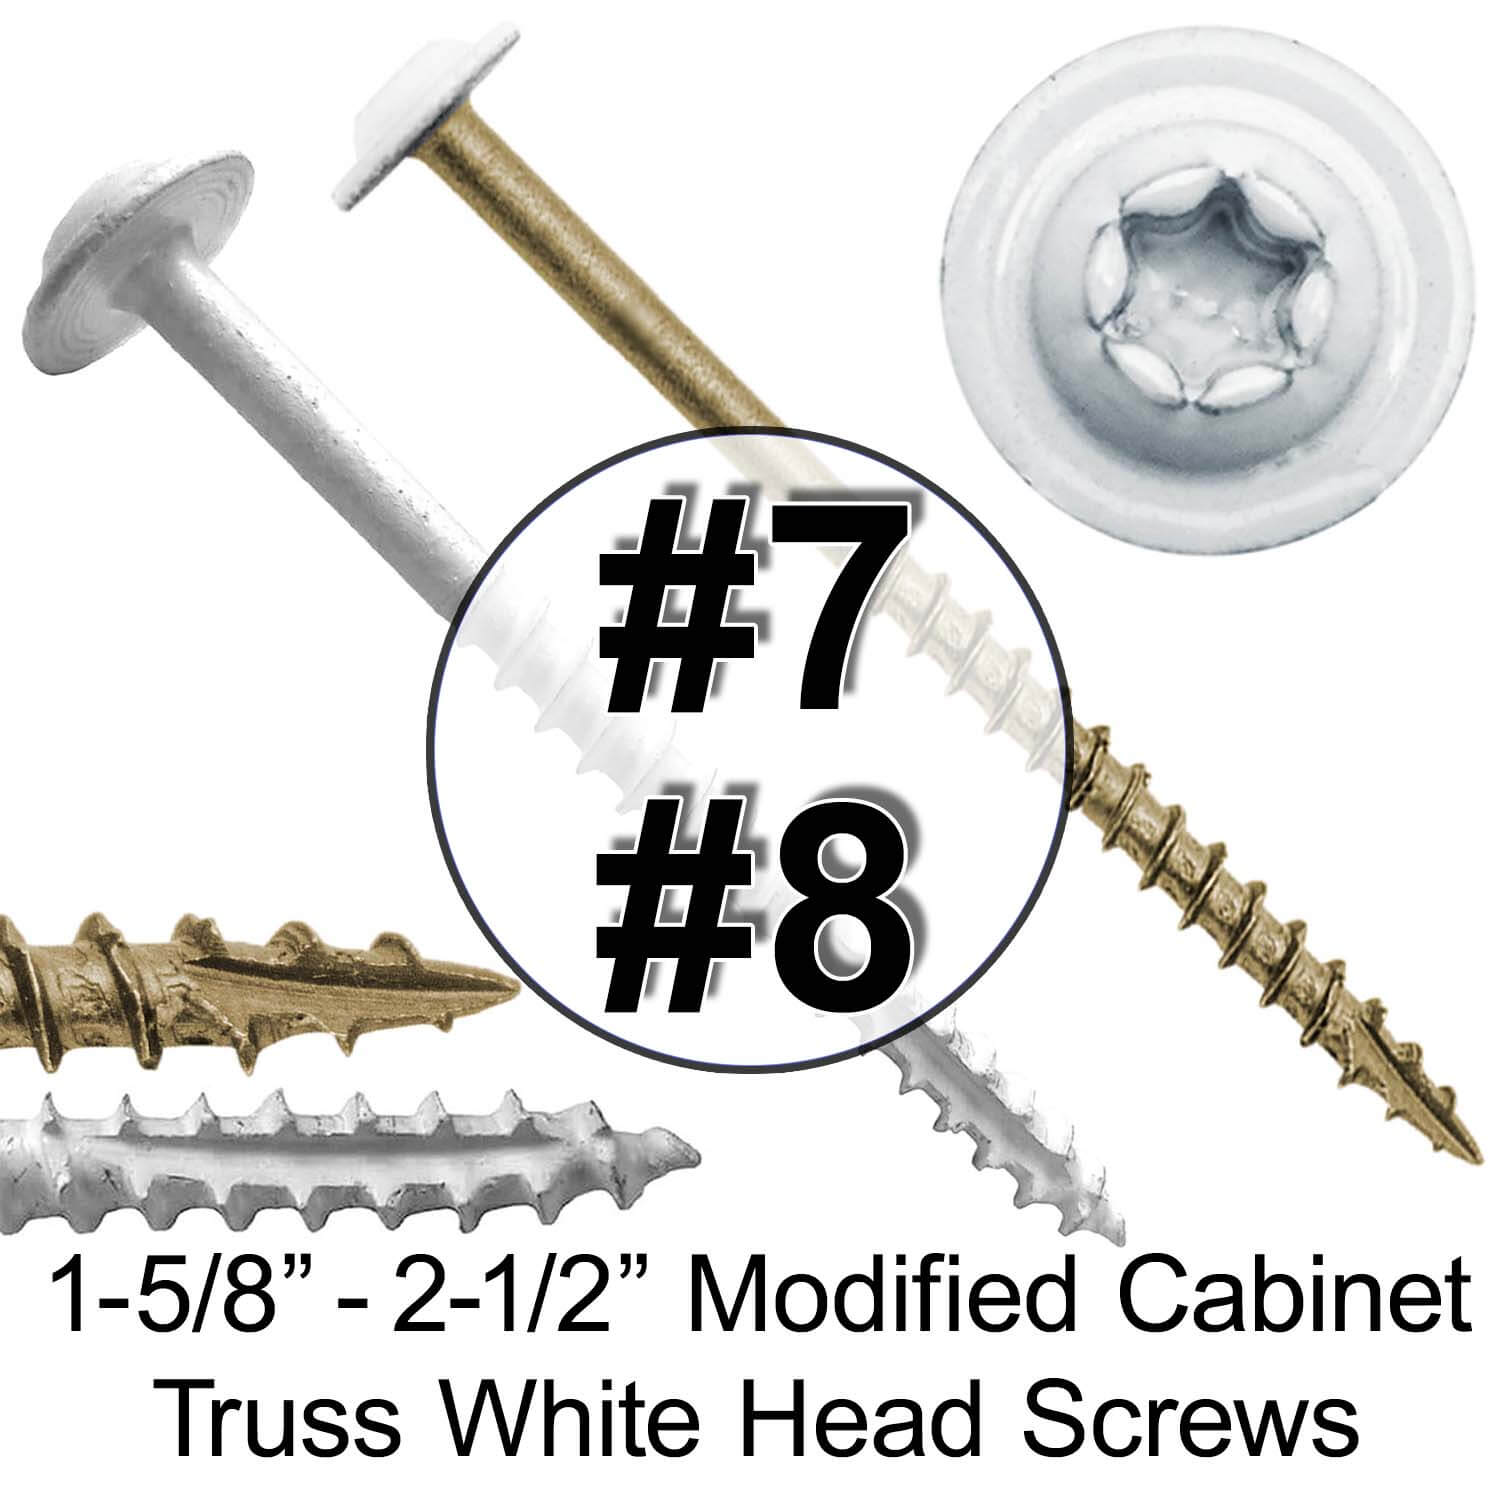 Bronze Star Exterior White Coated Round Head - Cabinet Wood Screw with Torx/Star Drive Head. Multipurpose Exterior/Interior Coated Torx/Star Drive